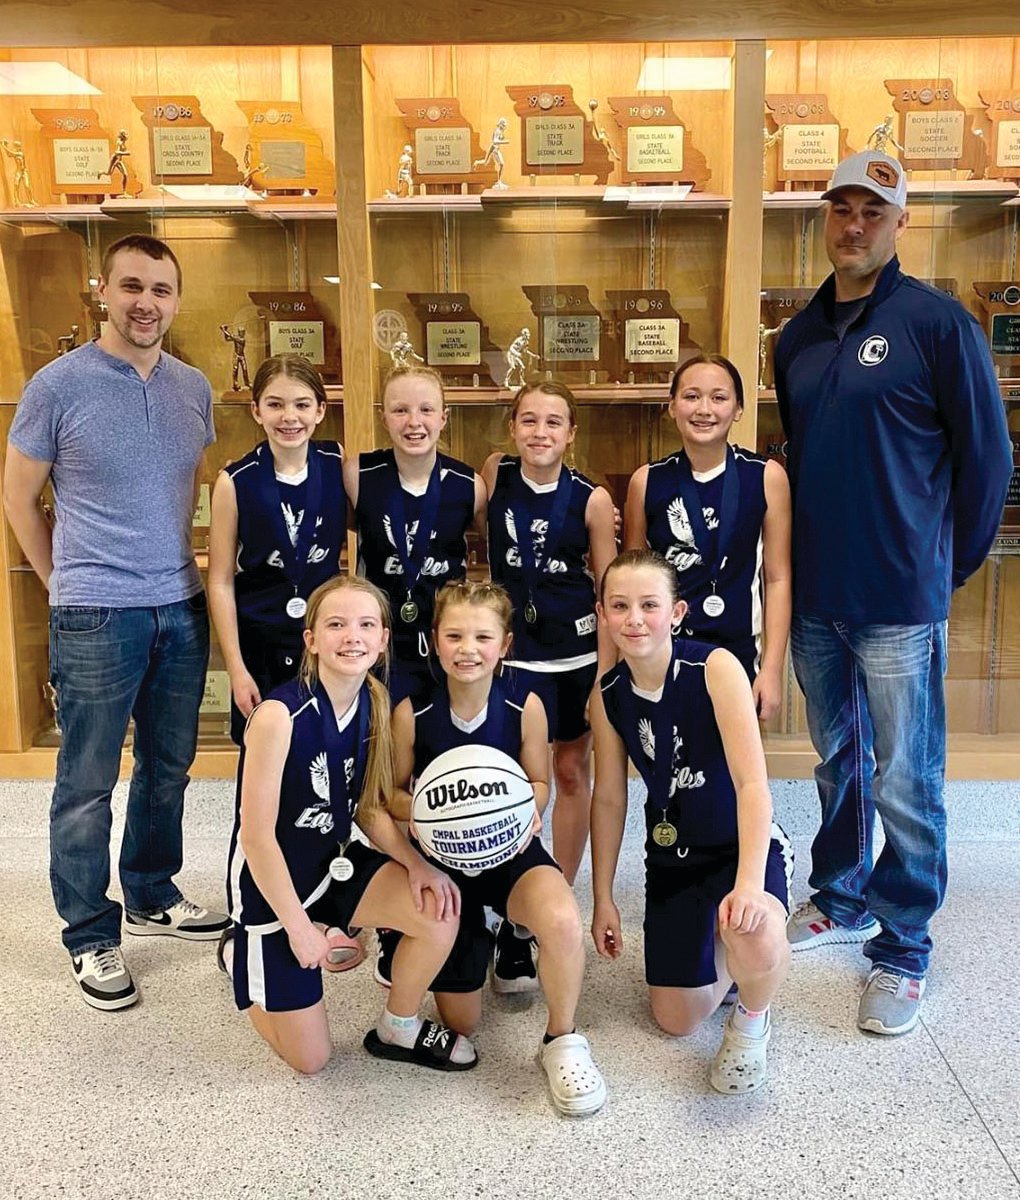 The Immaculate Conception-LC fifth-grade Lady Eagles (Loose Creek/Westphalia) won the Catholic Bowl. Team members are, from left to right, front row, Chloe Voss, Lexi Massman, Gracie Atkins; and in the back row, Coach Brenton Voss, Kamryn Haslag, Lyla Riegel, Rilynn Wieberg, Camille Dickneite, and Coach Sean Haslag.